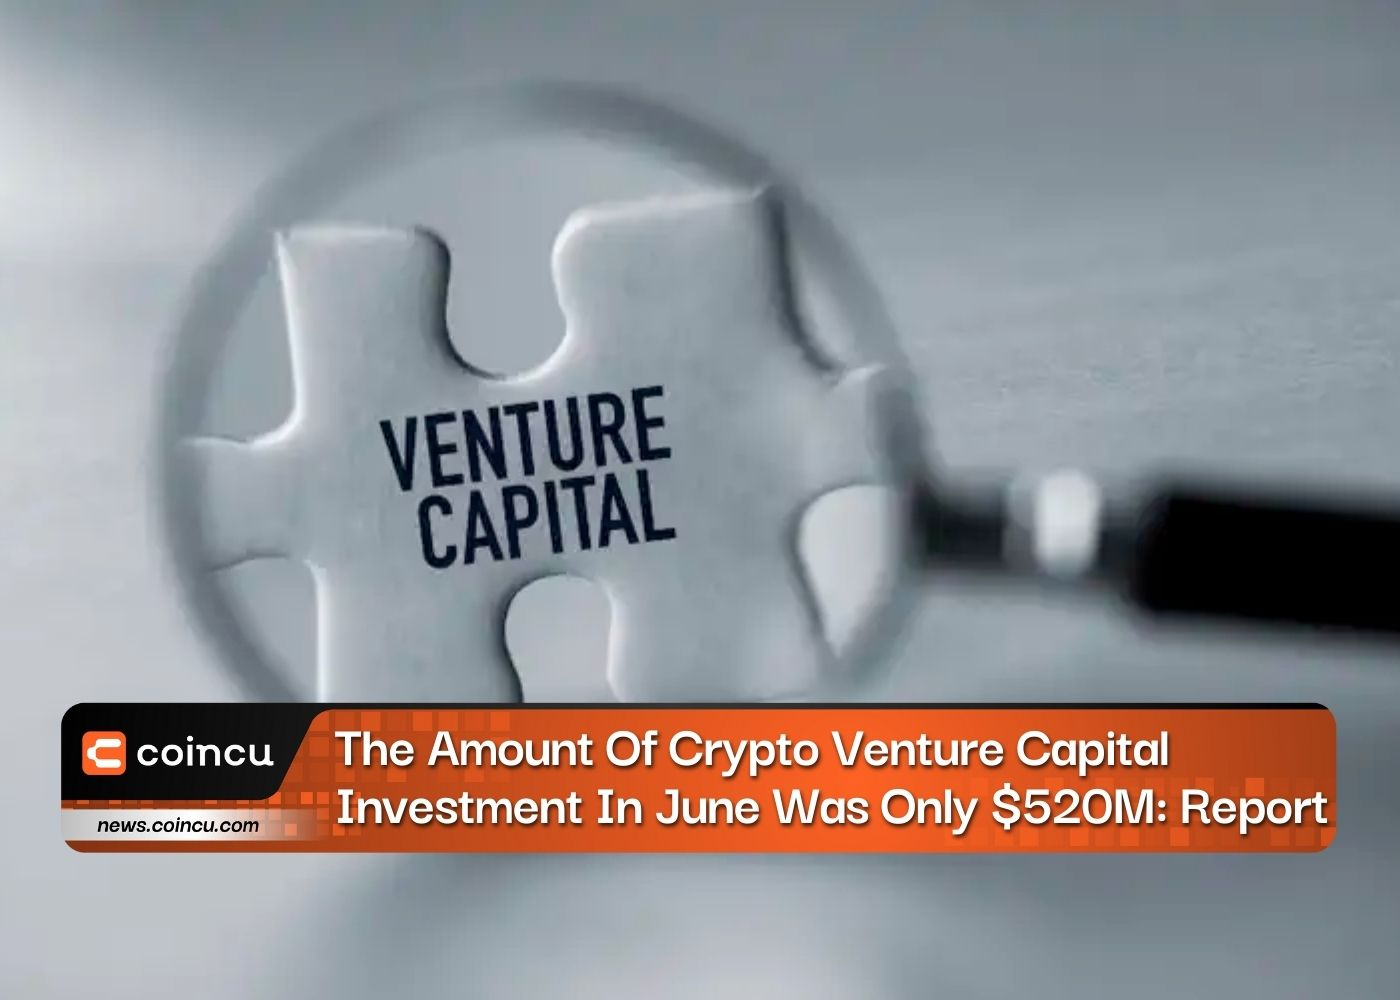 The Amount Of Crypto Venture Capital Investment In June Was Only $520M: Report